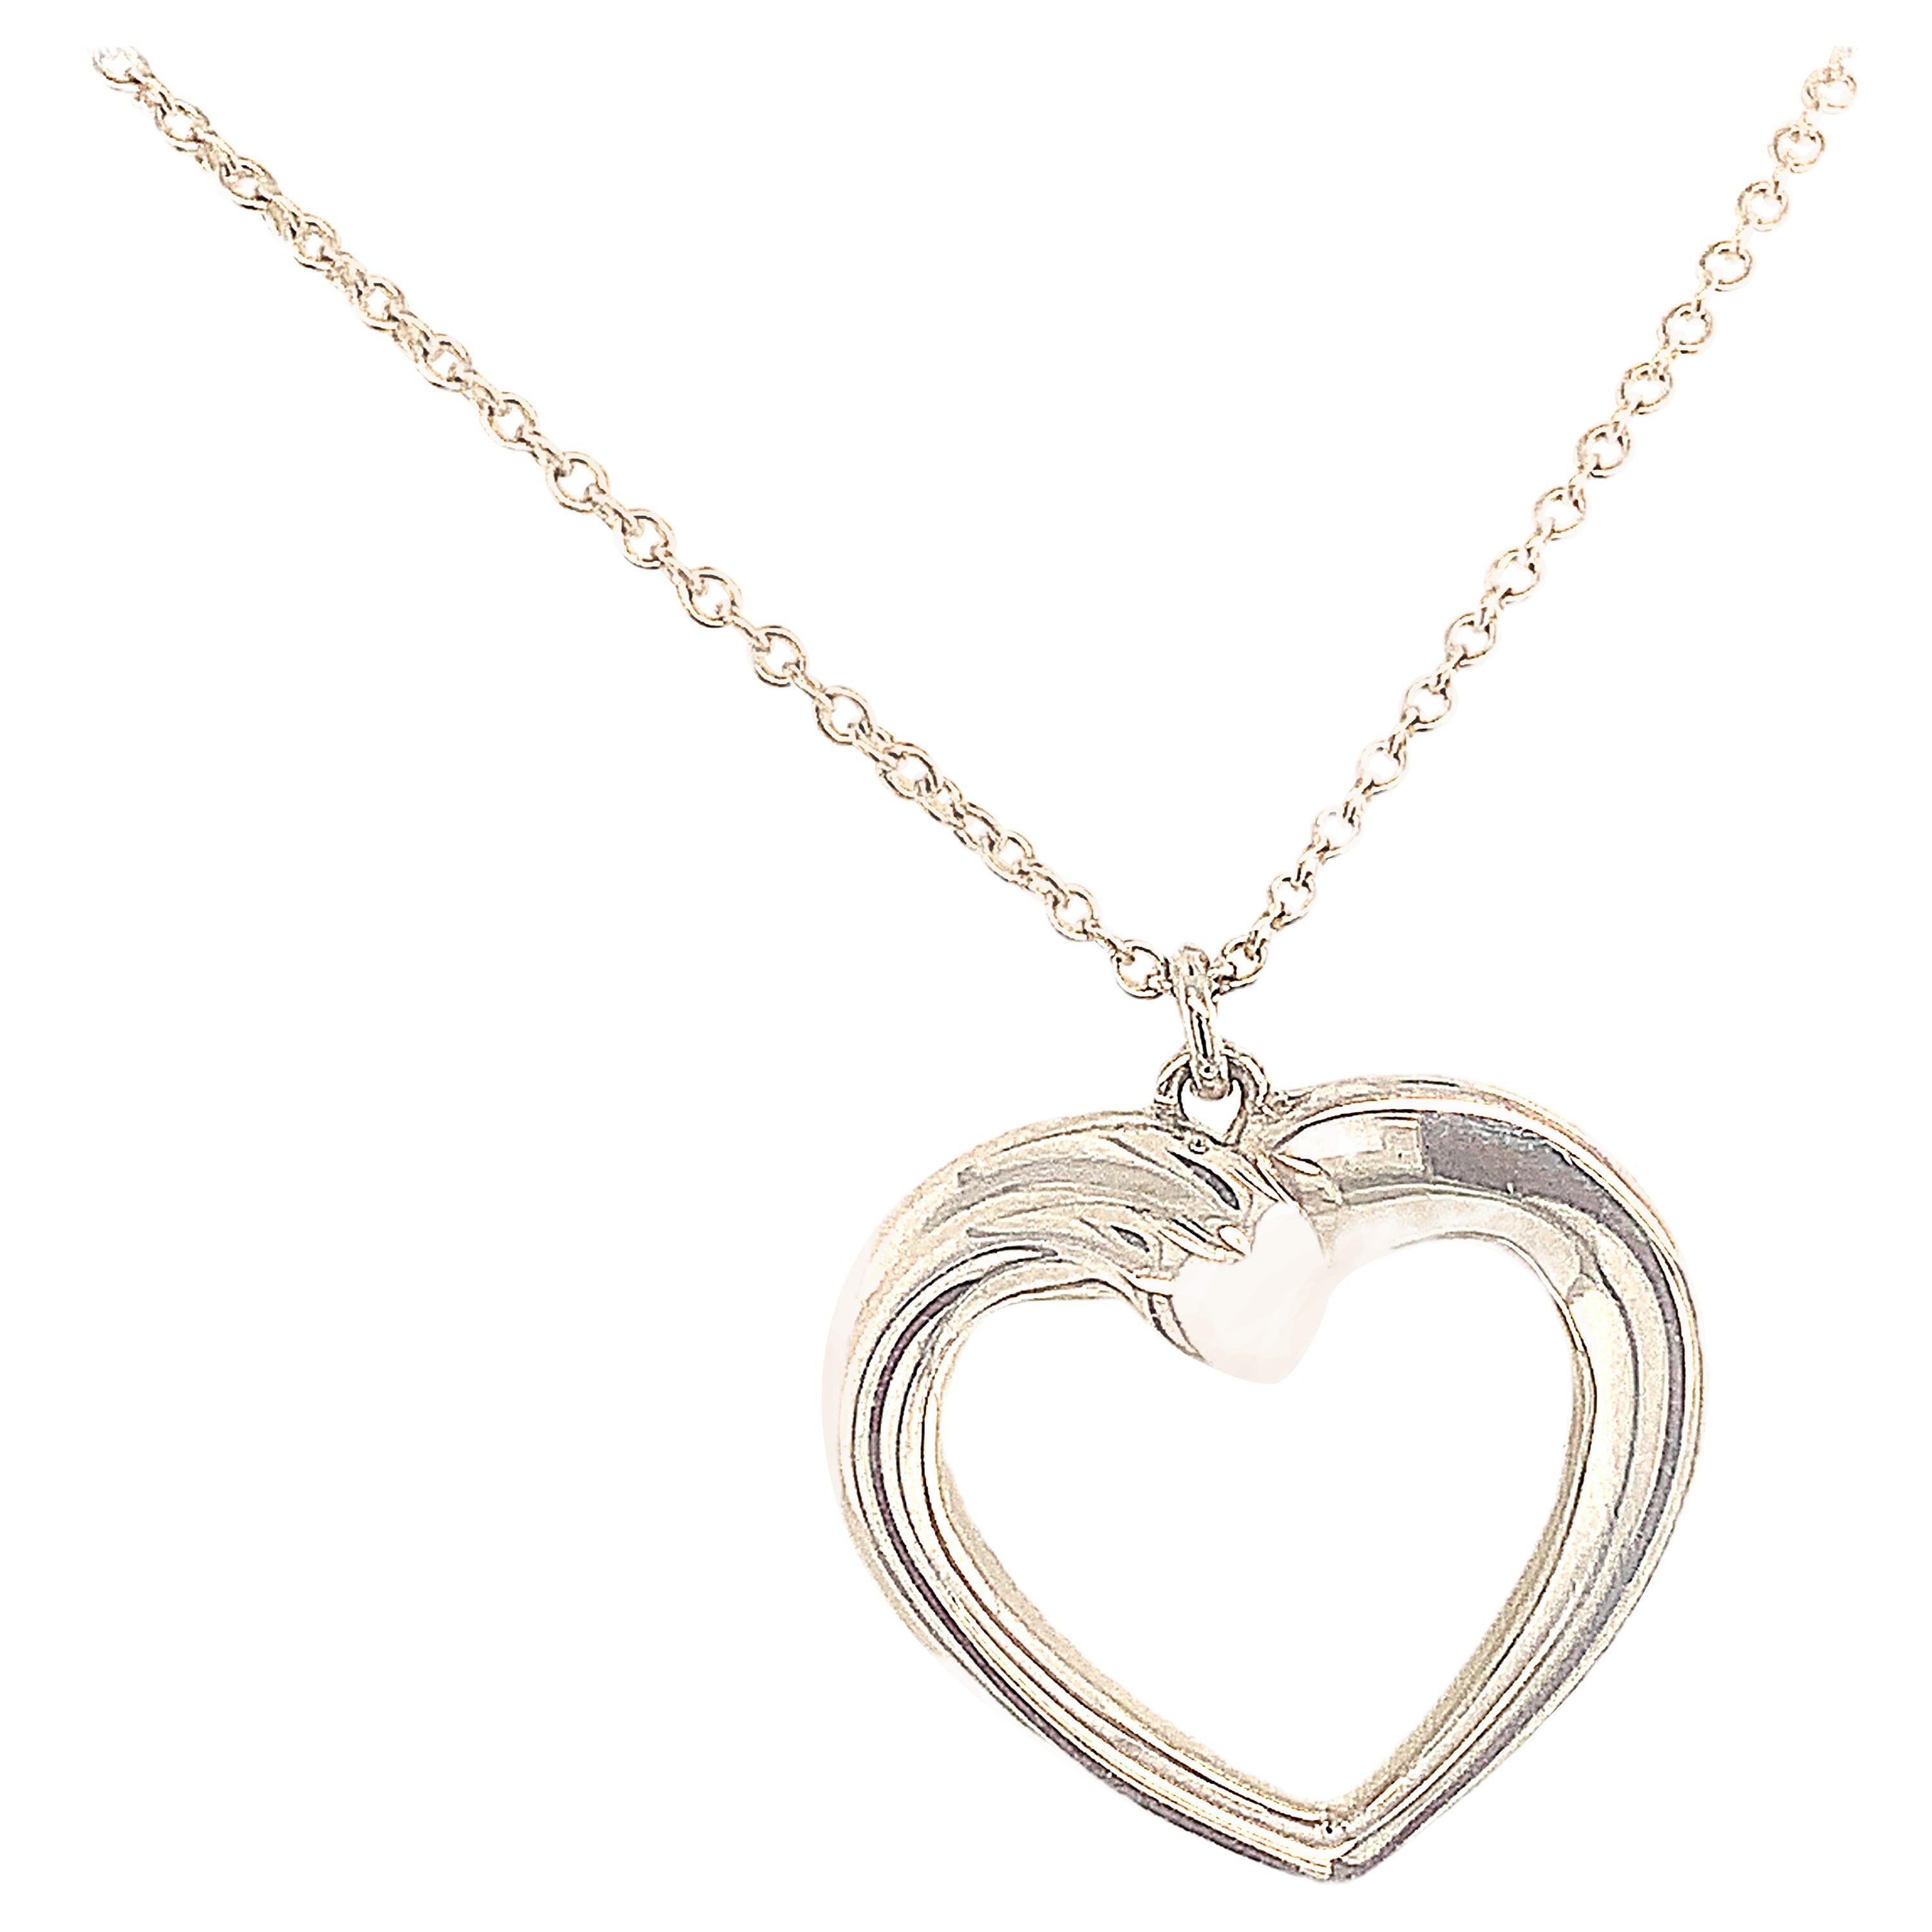 Tiffany & Co Estate Sterling Silver Heart Necklace 16 Inches 4.4 Grams